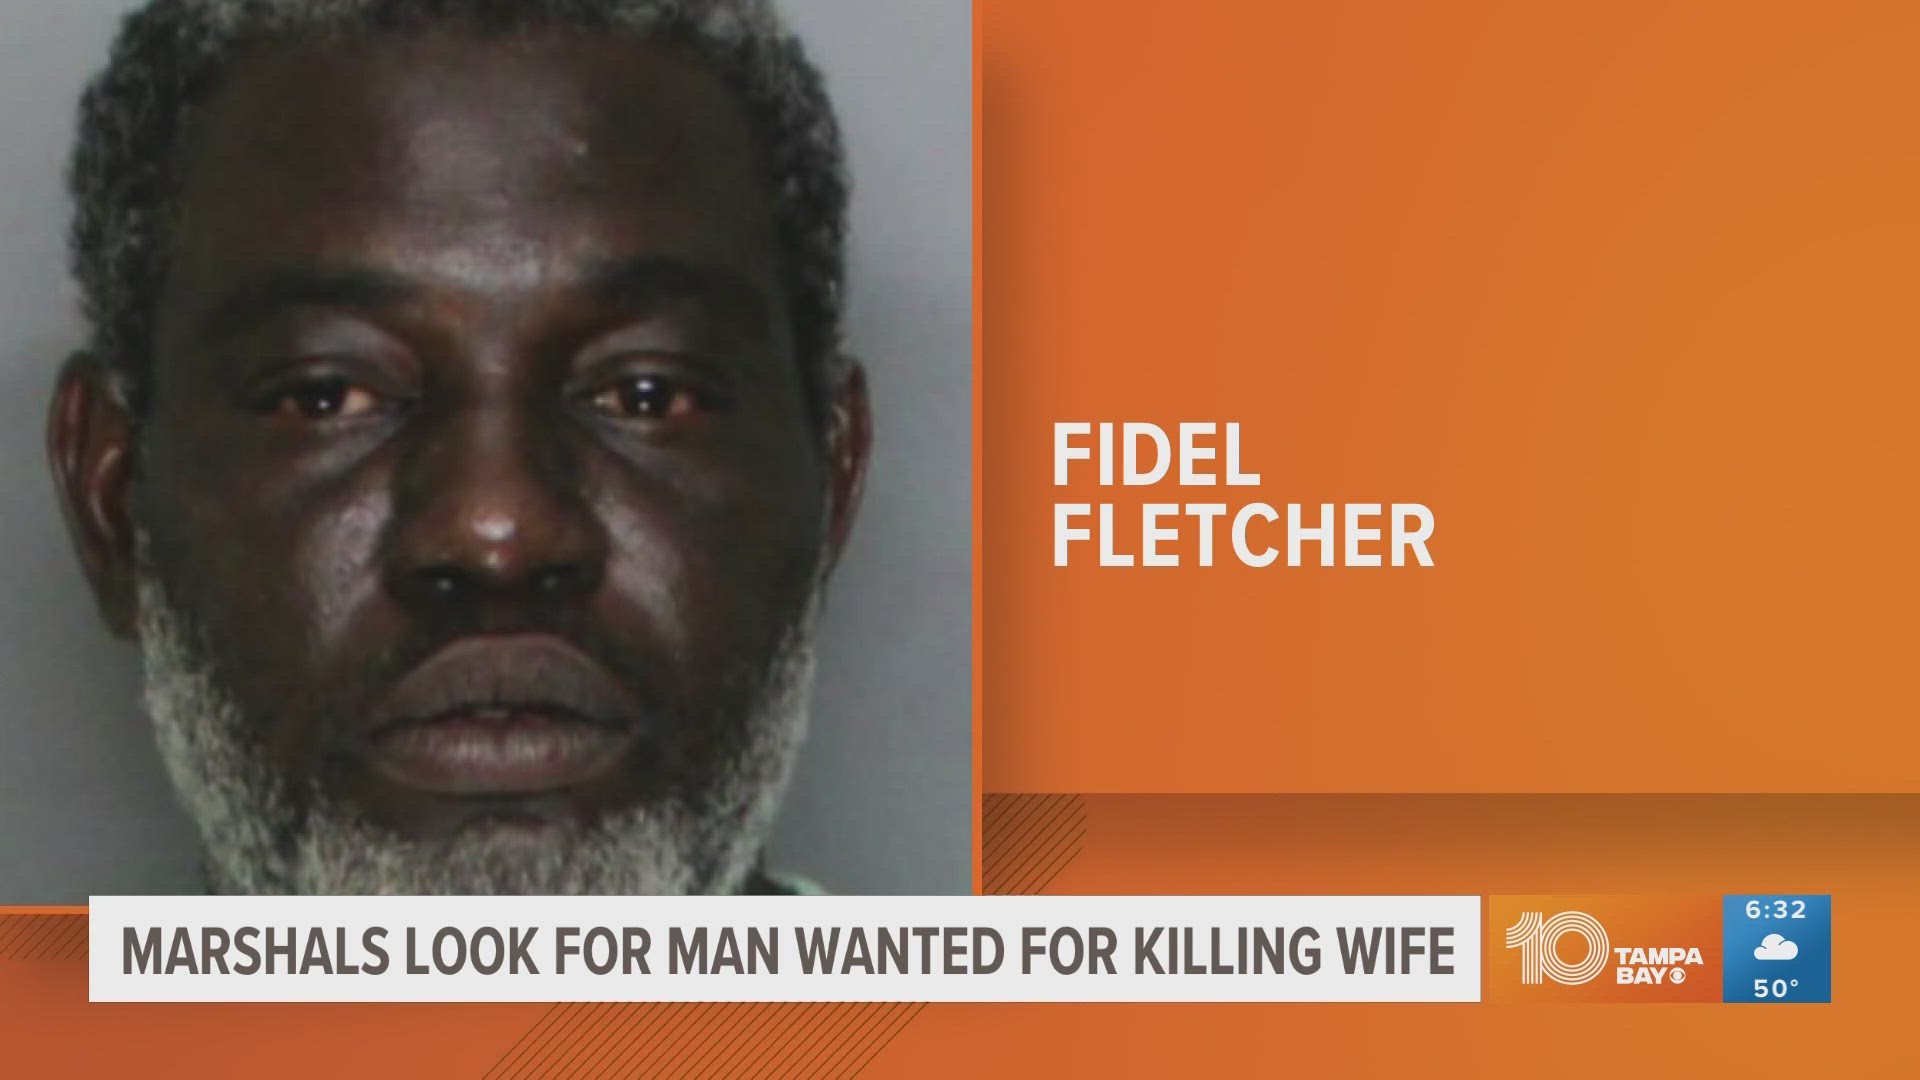 Fidel Fletcher also goes by the name Neil, officials say.